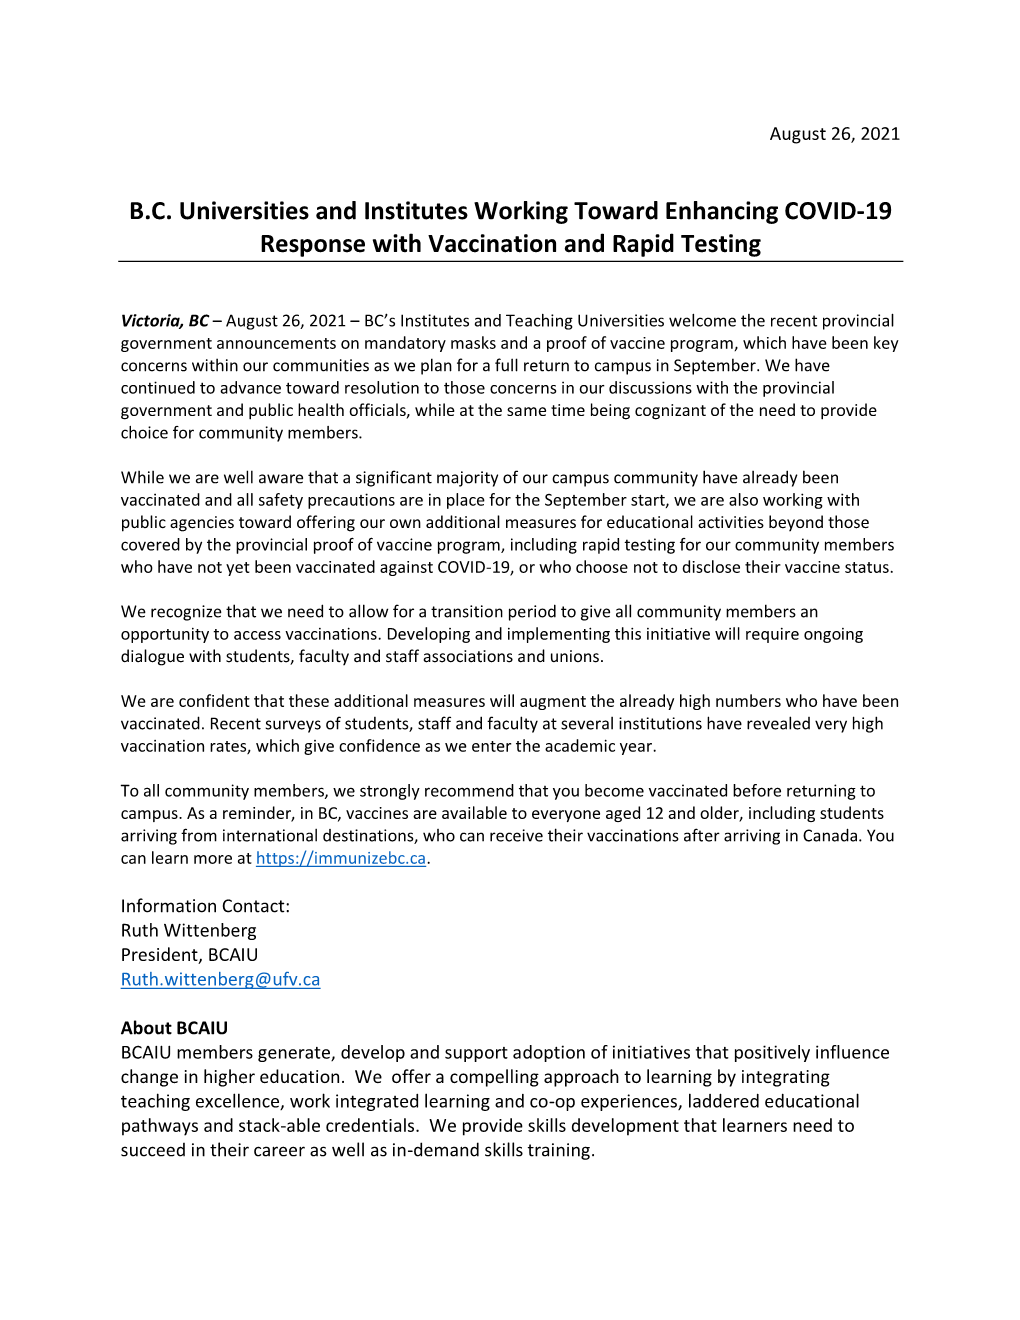 B.C. Universities and Institutes Working Toward Enhancing COVID-19 Response with Vaccination and Rapid Testing